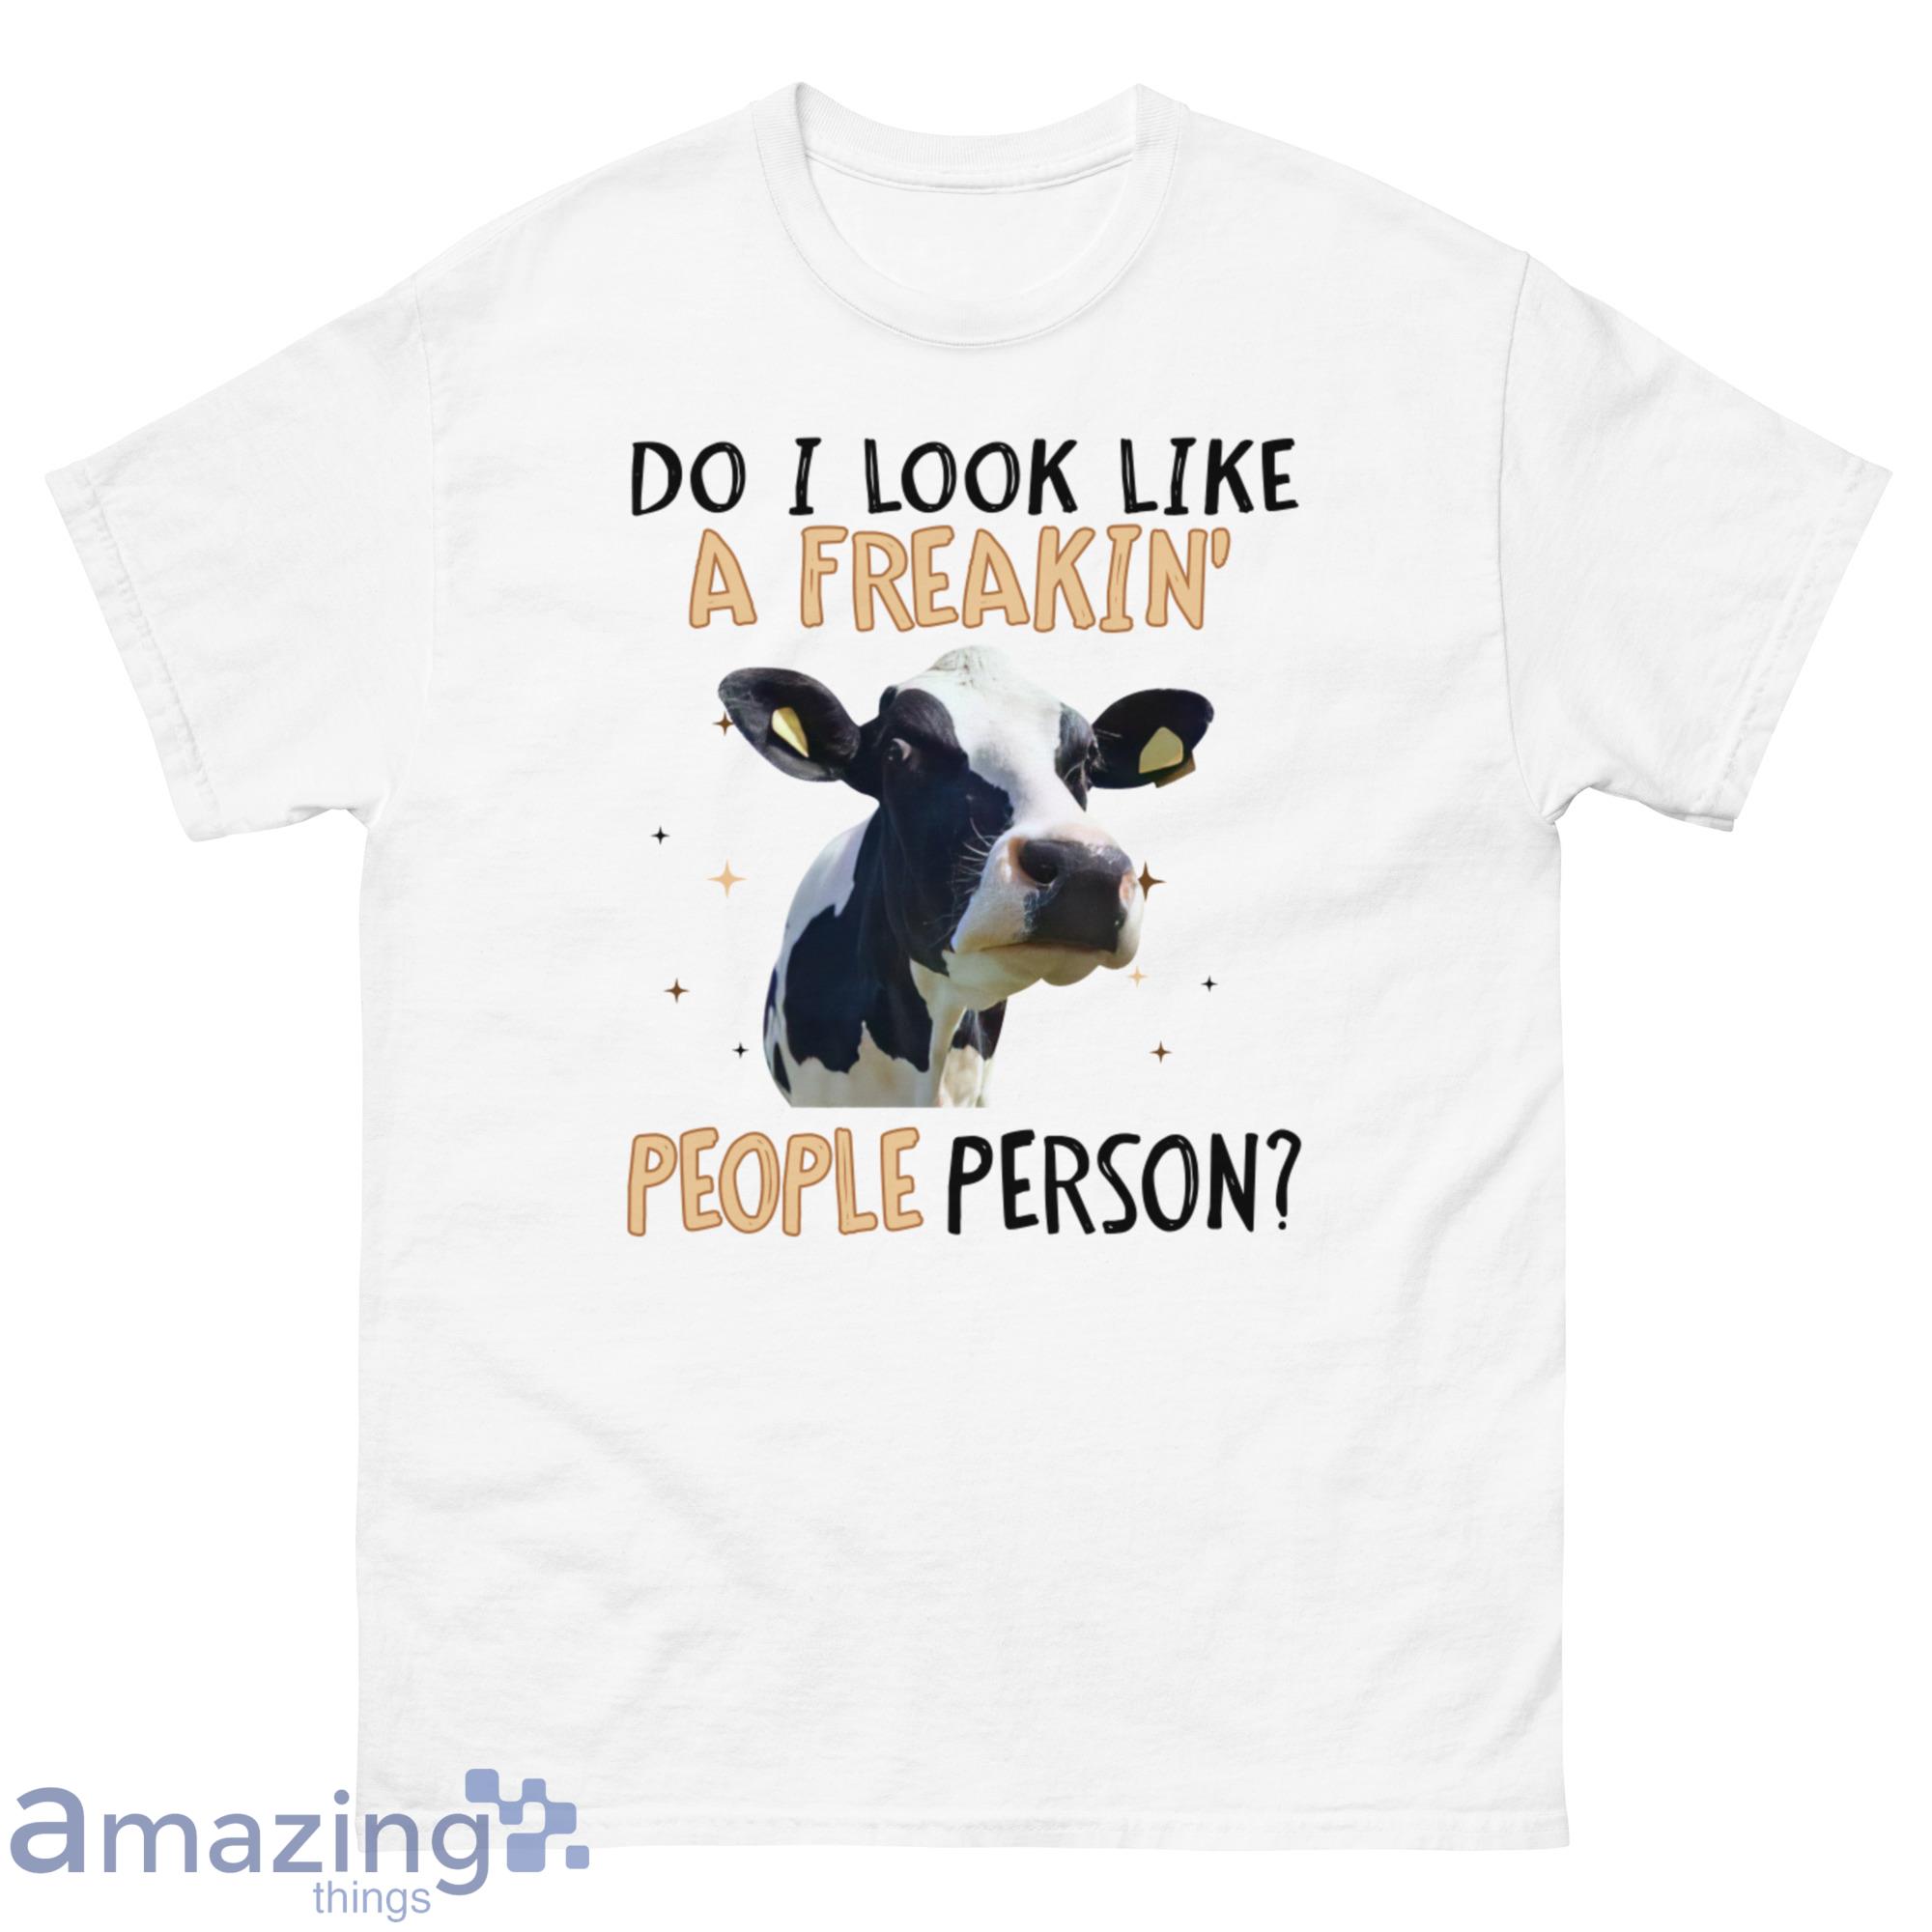 Do I Look Like A Freakin' People Person The Cow Shirt - G500 Men’s Classic T-Shirt-1